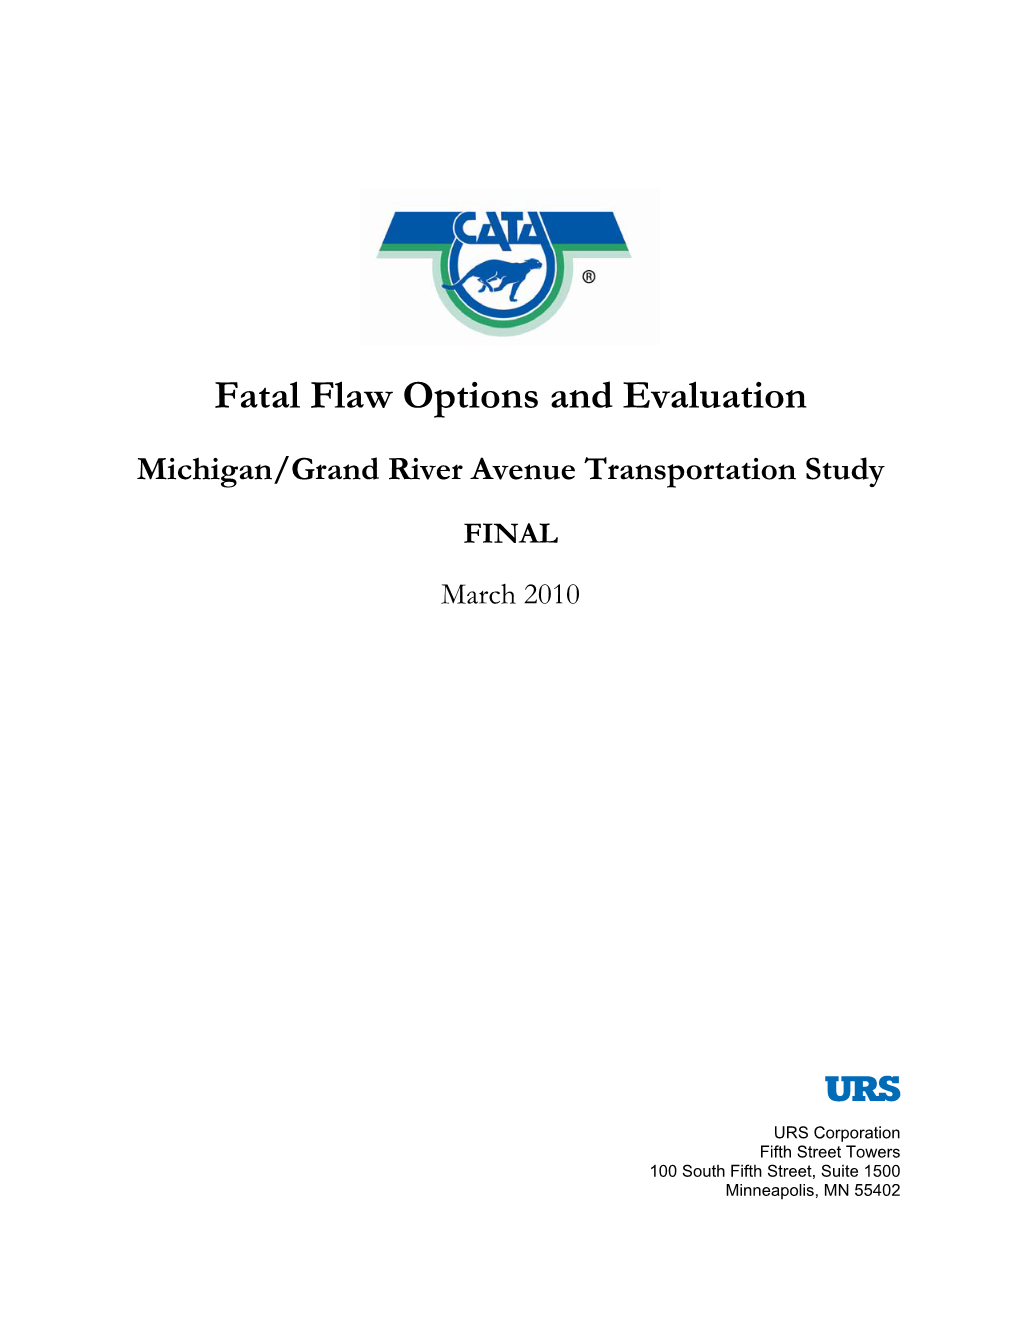 Fatal Flaw Options and Evaluation Report